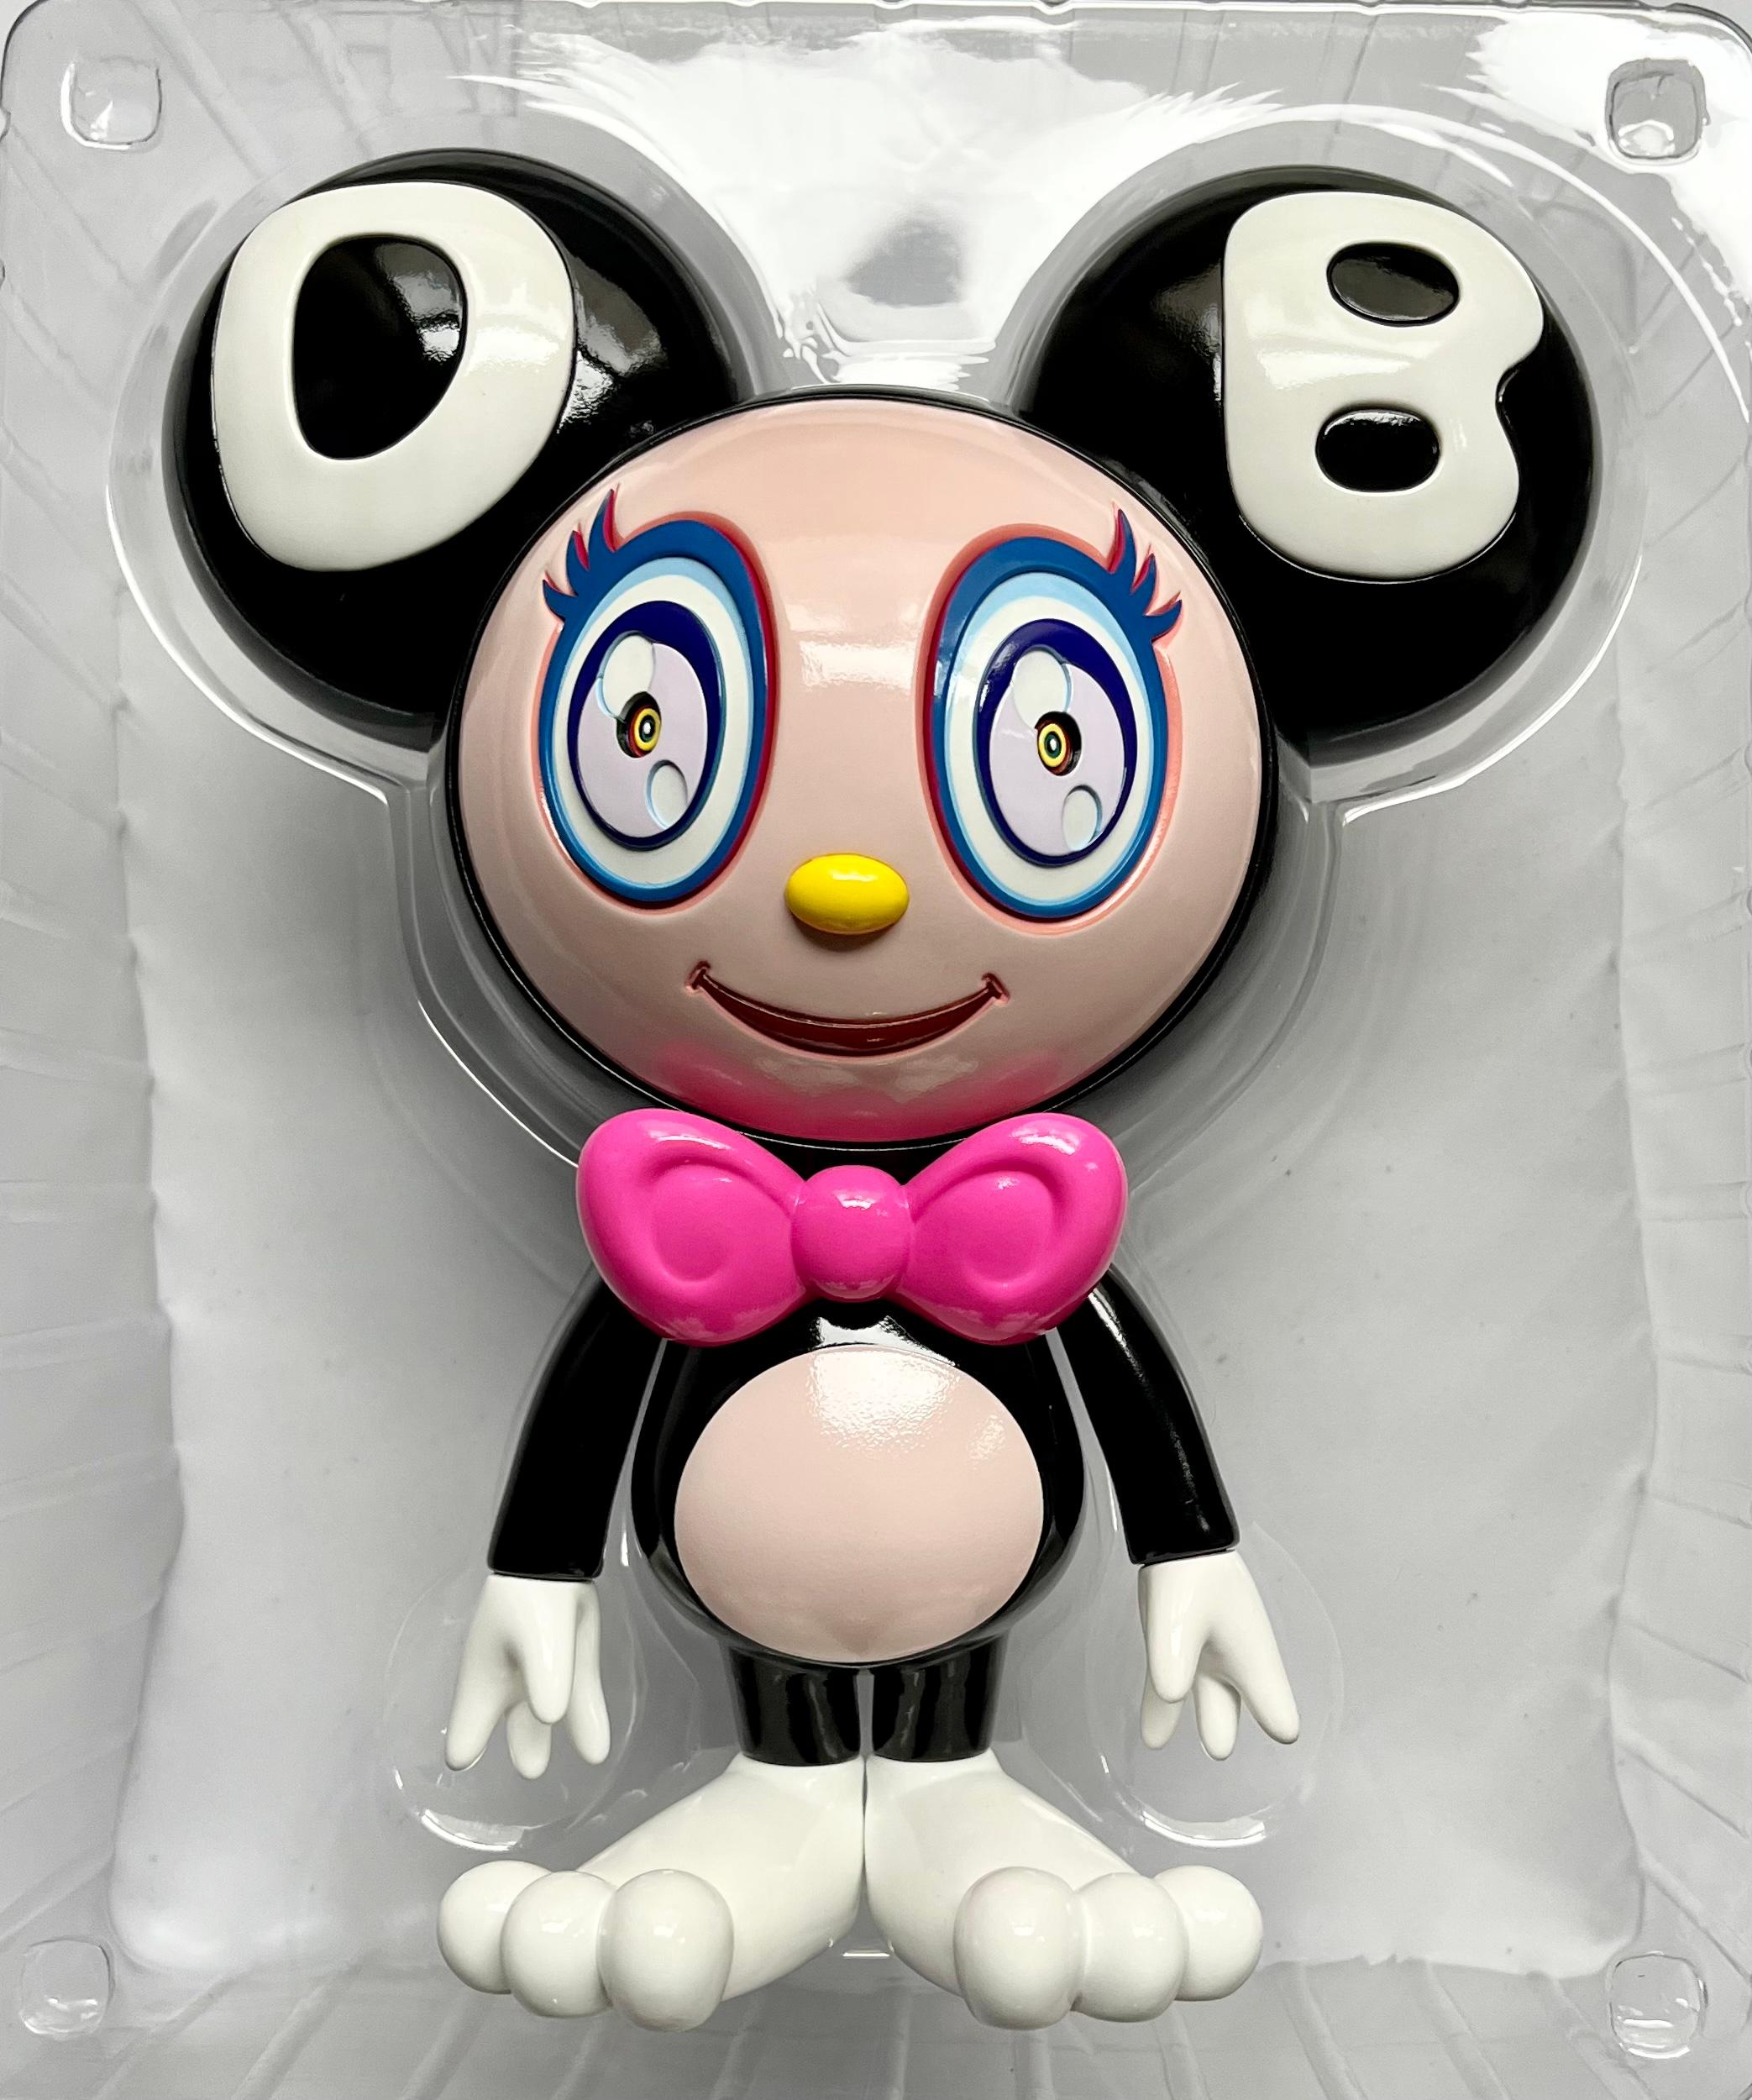 Takashi Murakami DOB-kun Figure:
A limited edition Takashi Murakami art toy featuring the artist's iconic DOB character. DOB-kun’s name, defined in his rounded ears and face, is the first three letters of an improvised phrase that is a nonsensical